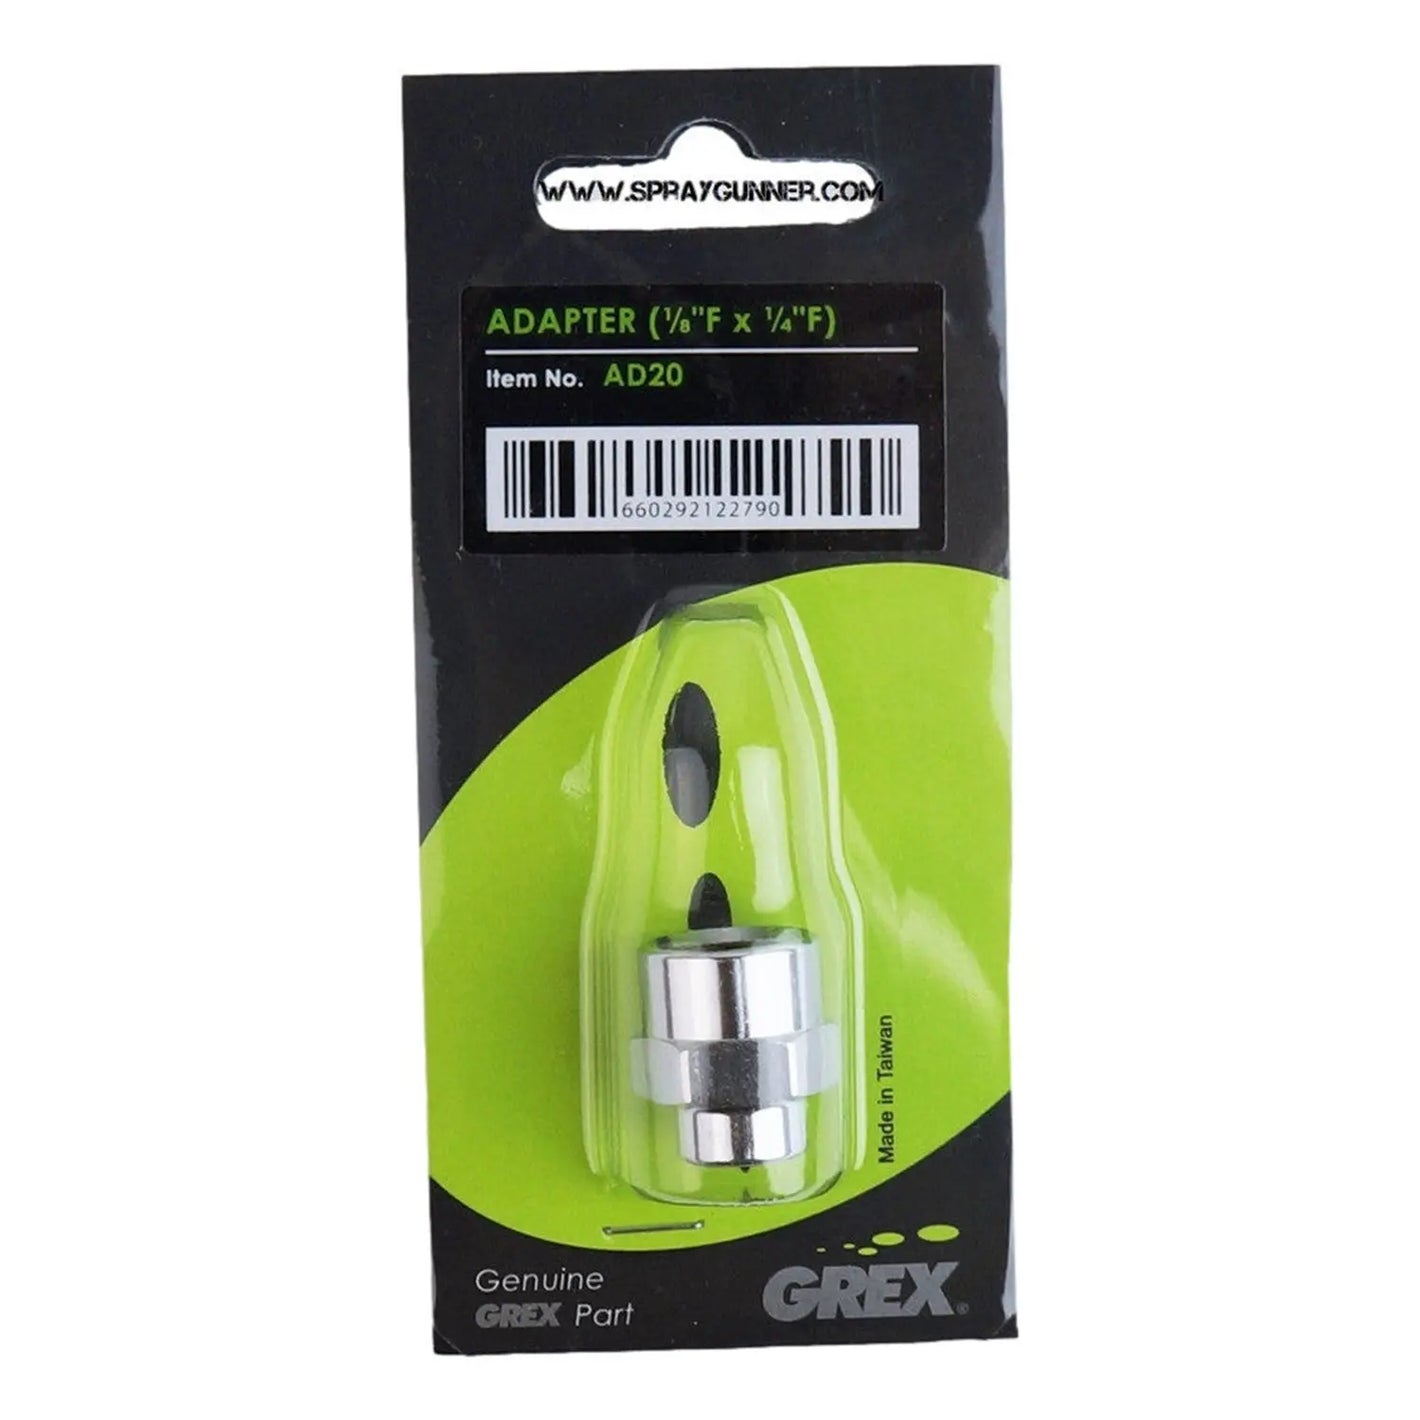 Grex Adapter AD20 (1/8"F to 1/4"F) Grex Airbrush